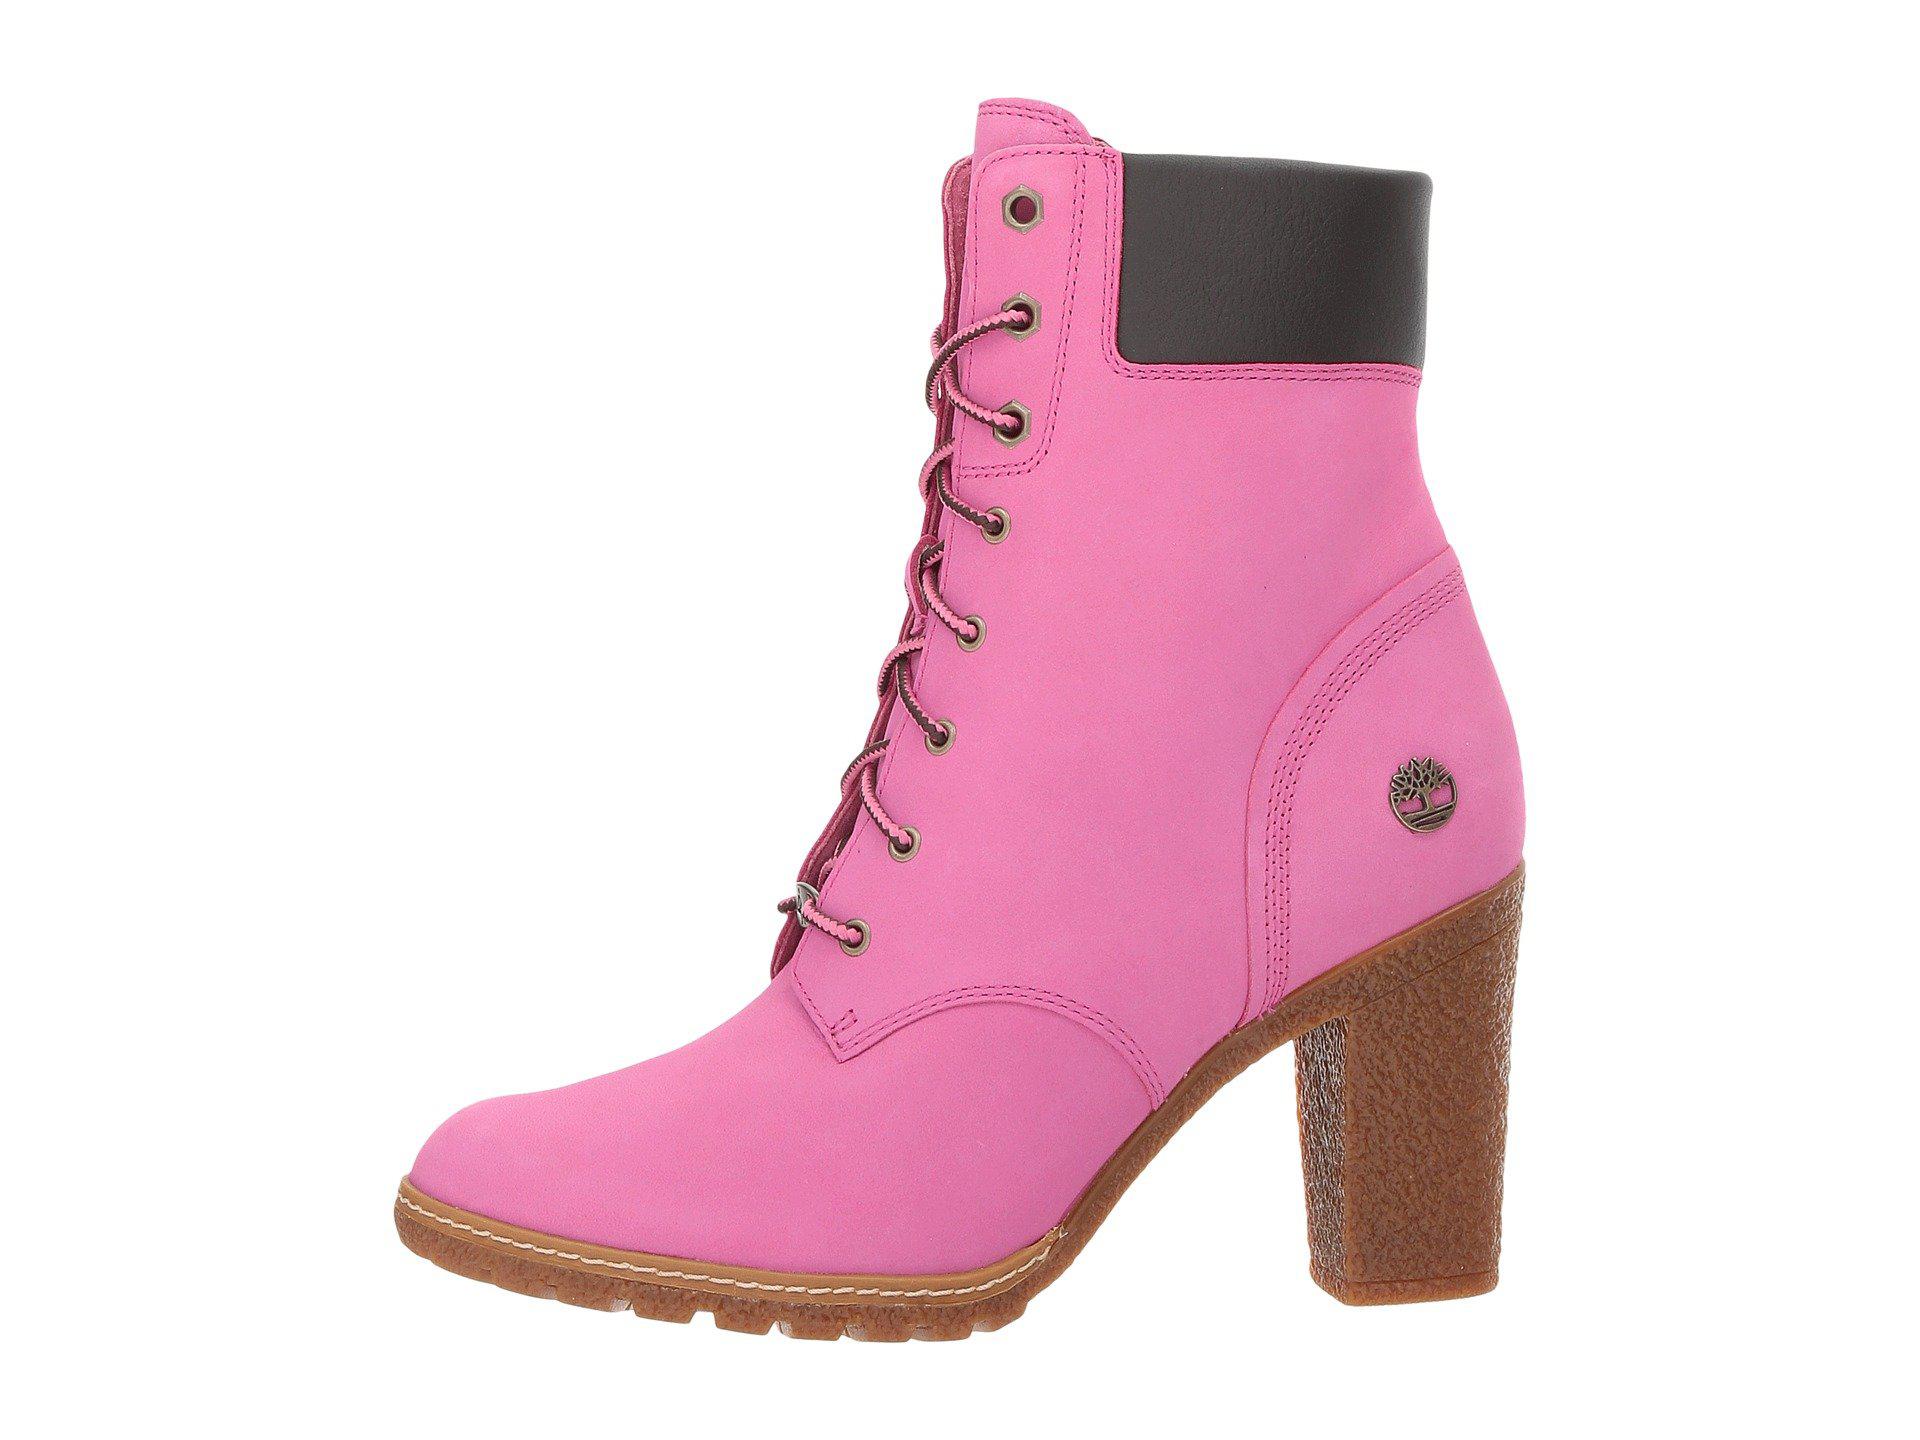 Timberland Leather 6" Glancy Boot - Susan G. Komen in Pink - Lyst